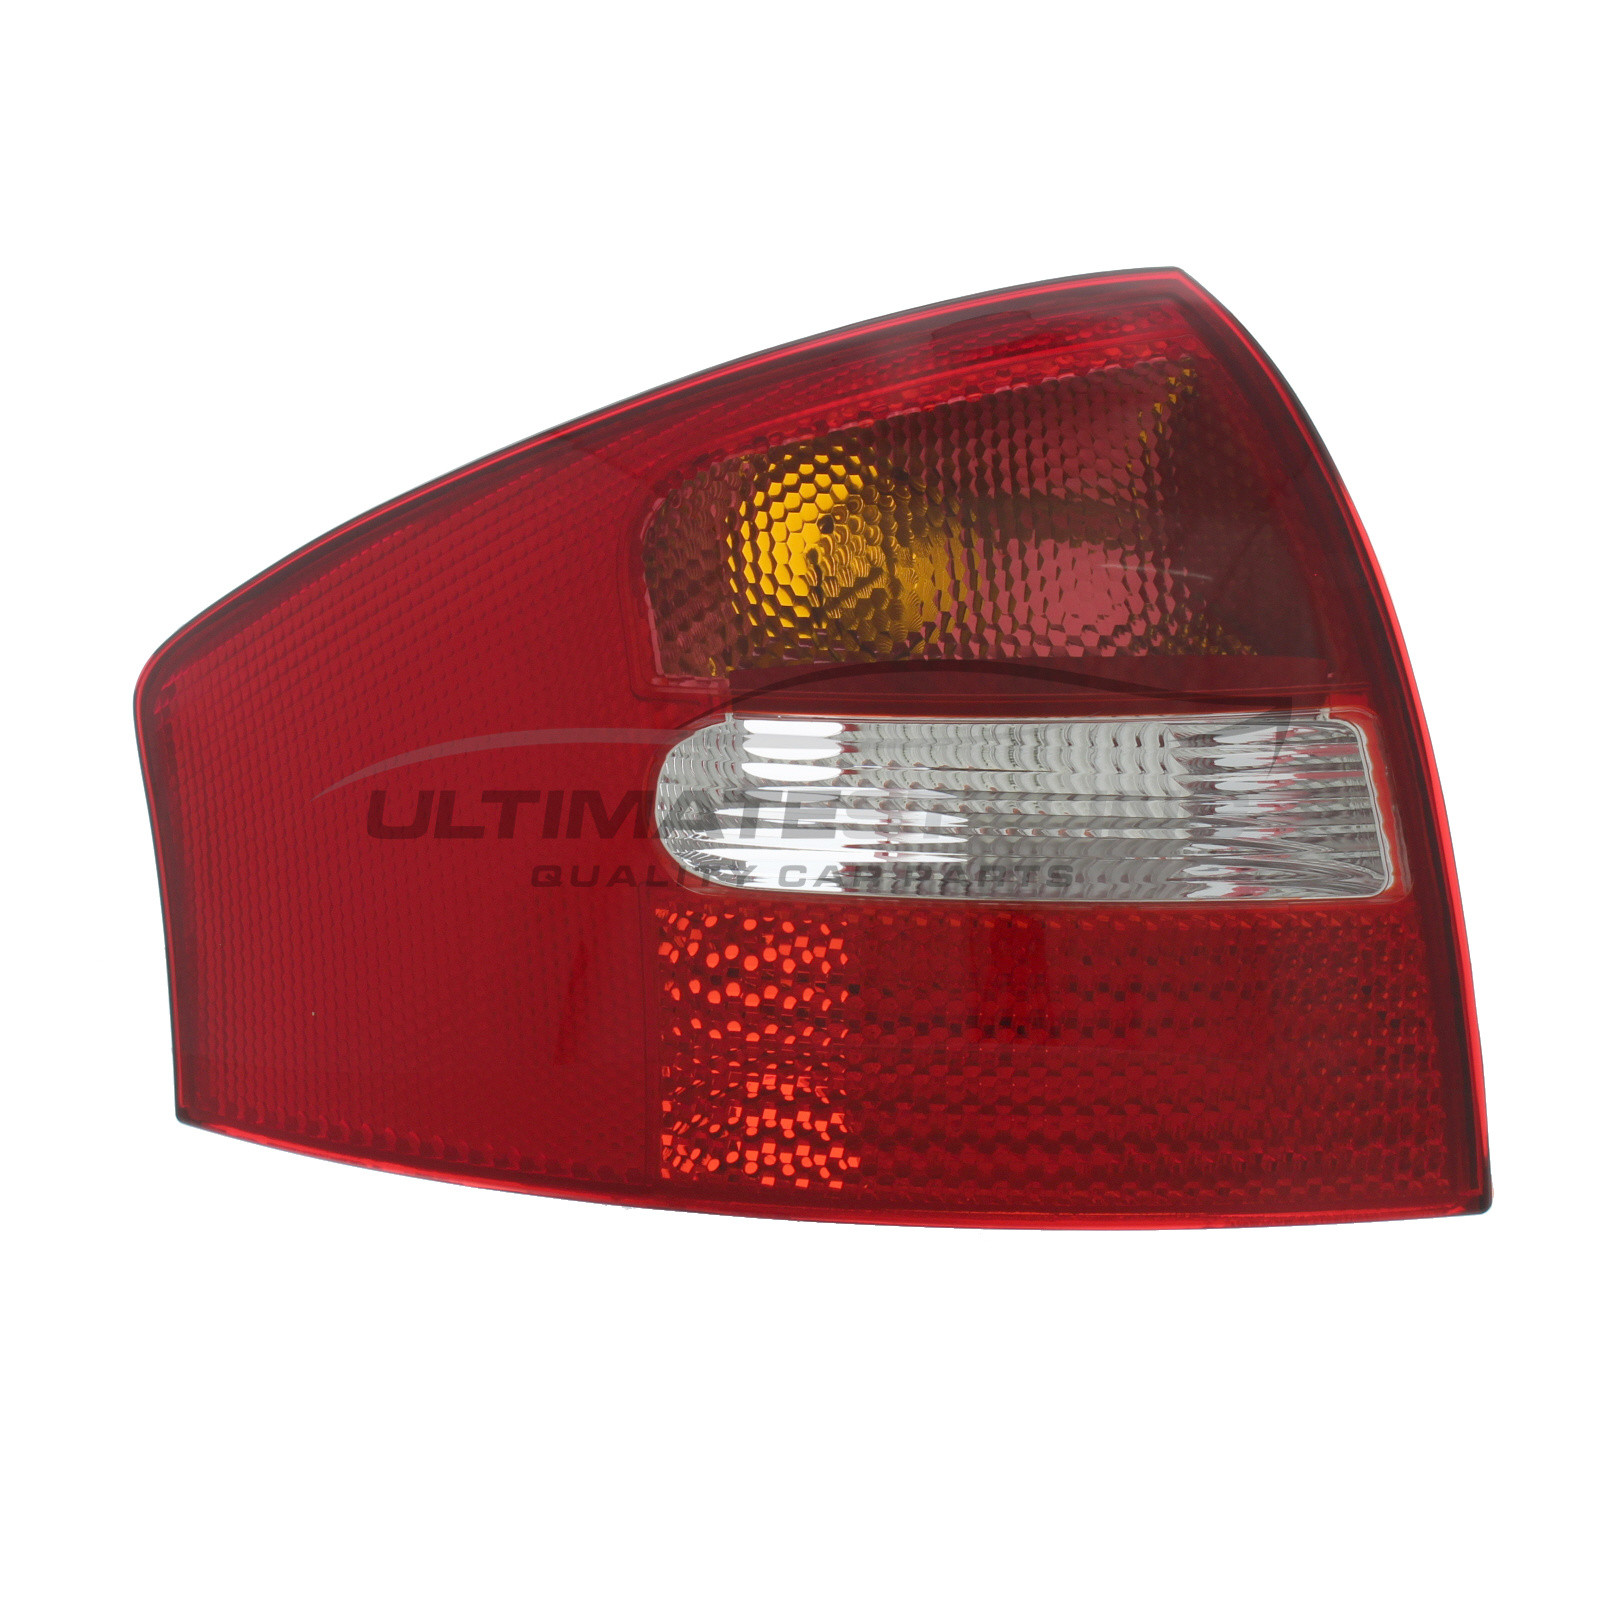 Audi A6 2001-2004 / Audi RS6 2002-2005 / Audi S6 2001-2004 Non-LED with Pink Tinted Indicator Rear Light / Tail Light Excluding Bulb Holder Passenger Side (LH)